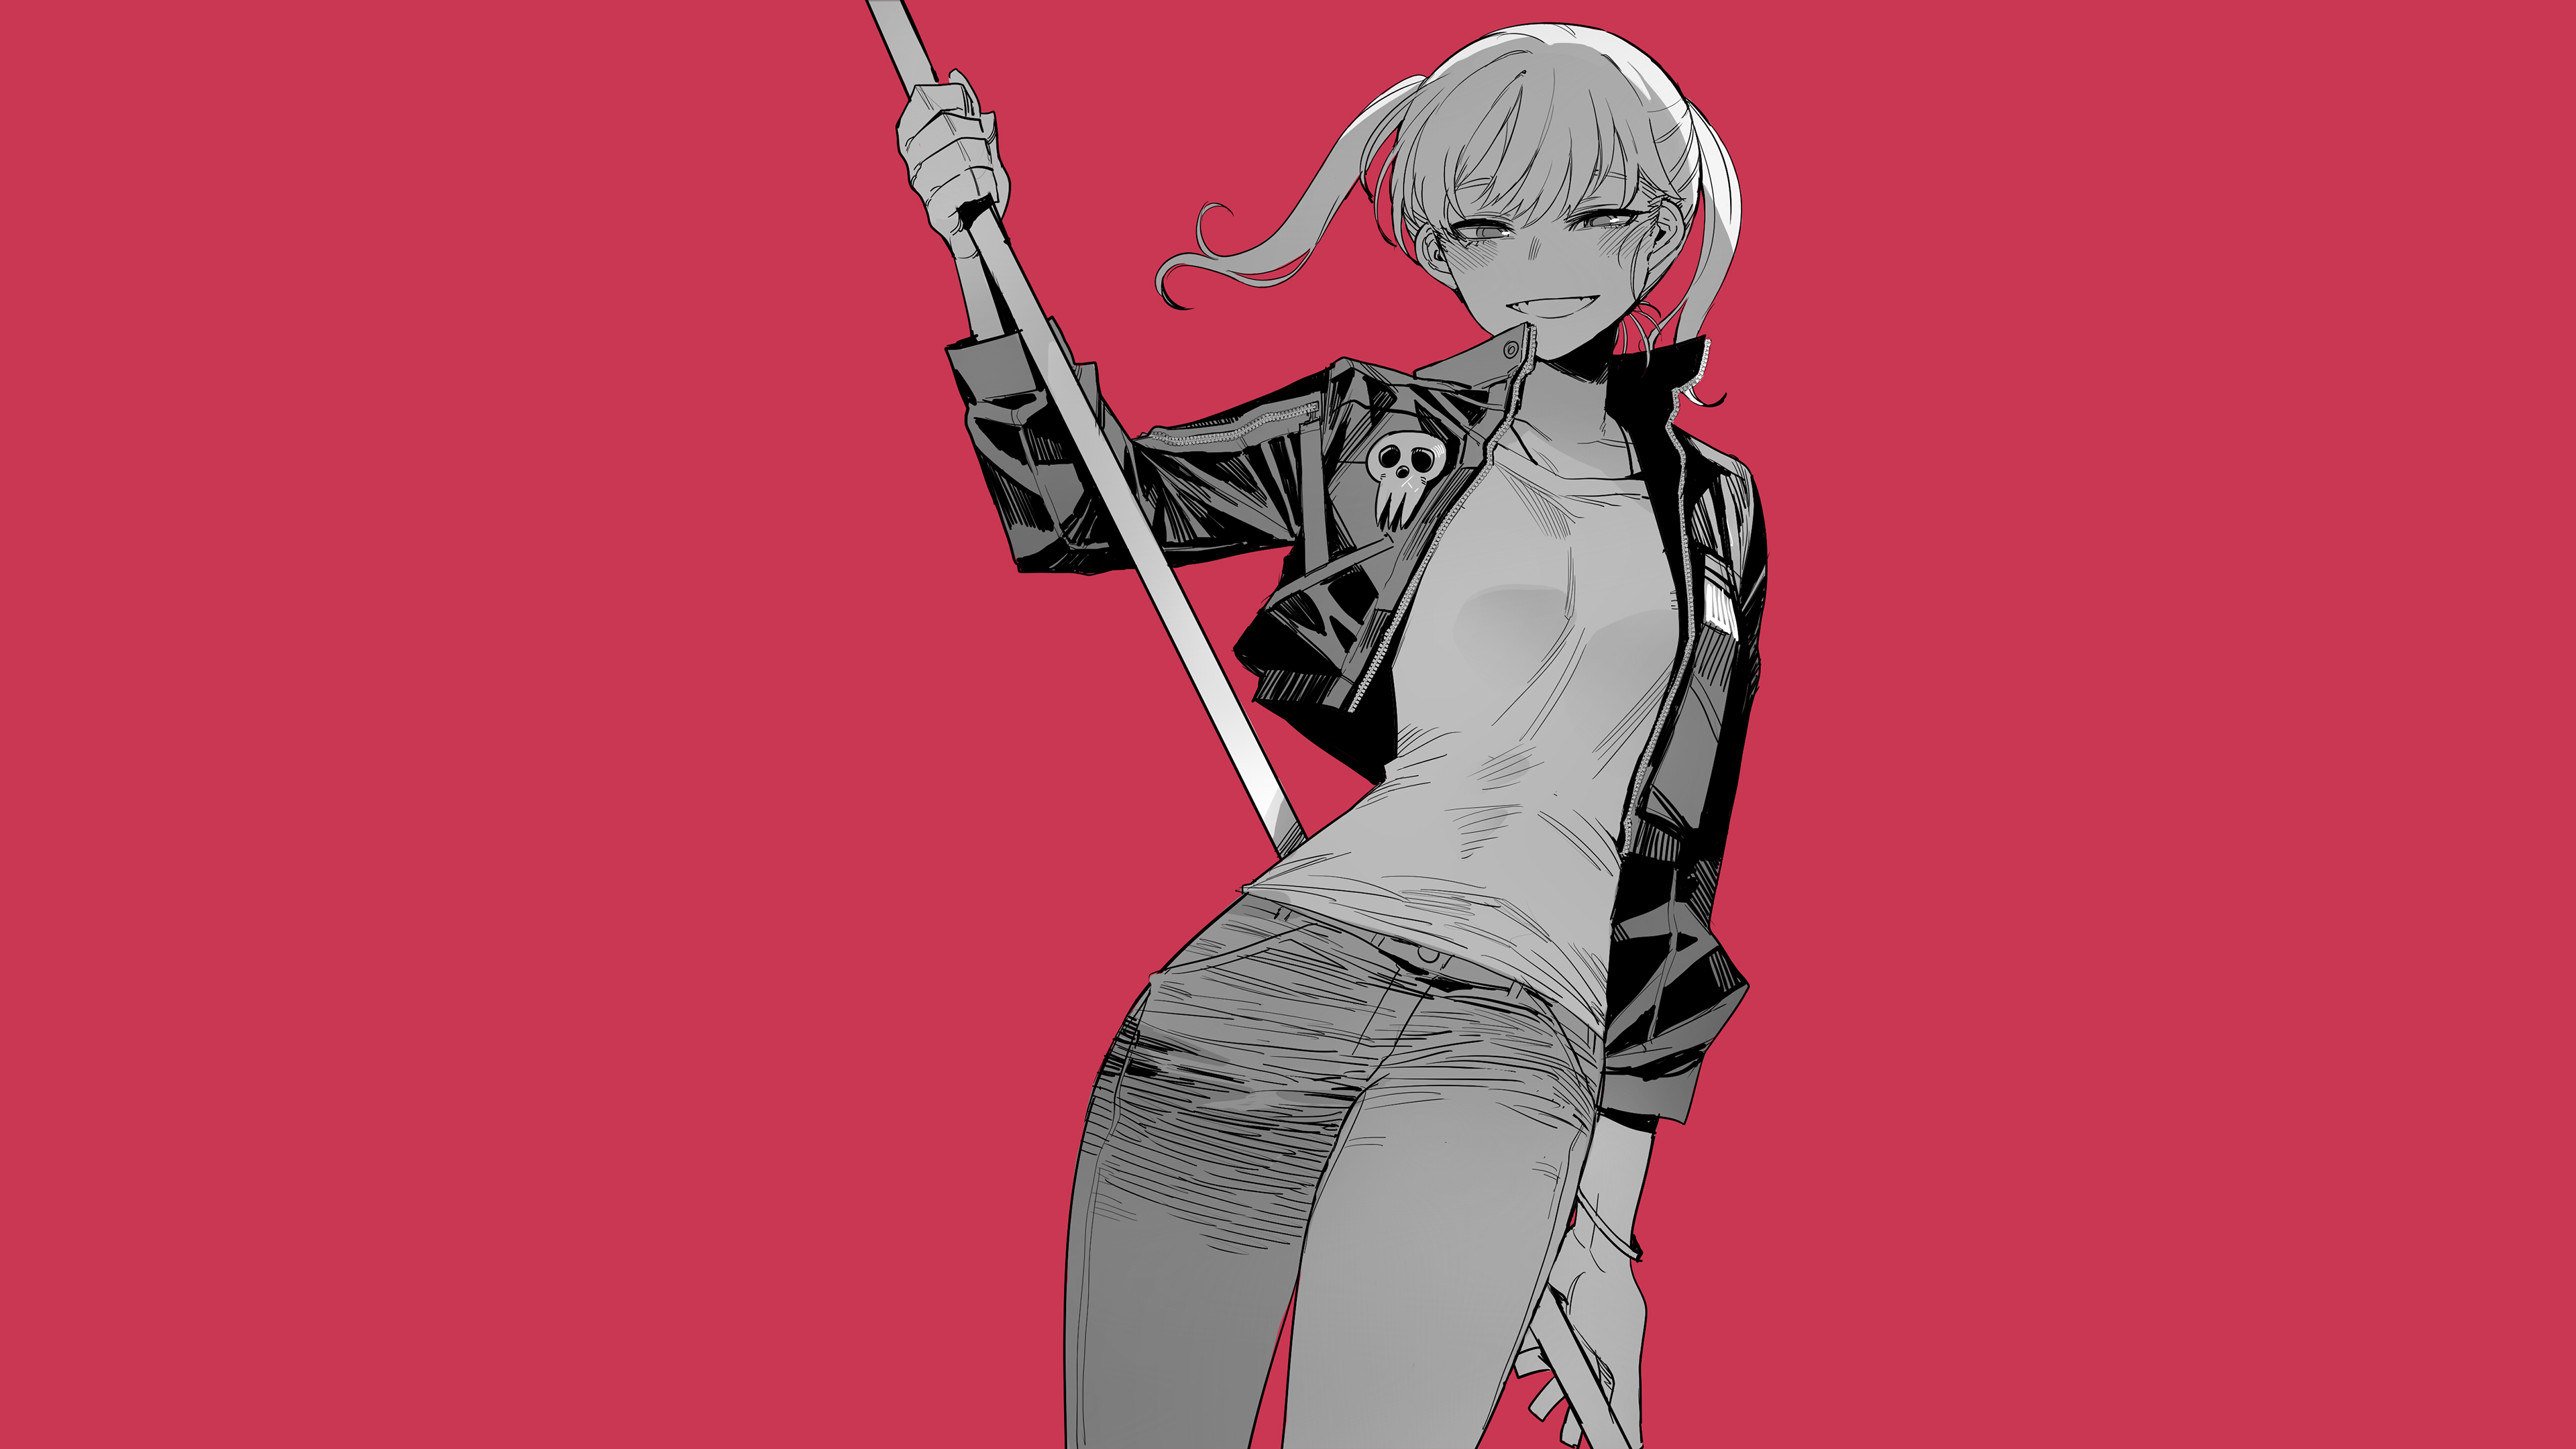 Anime 3840x2160 ratatatat74 Maka Albarn Soul Eater twintails jeans black jackets blonde looking at viewer bracelets red background simple background anime anime girls digital art 2D fan art